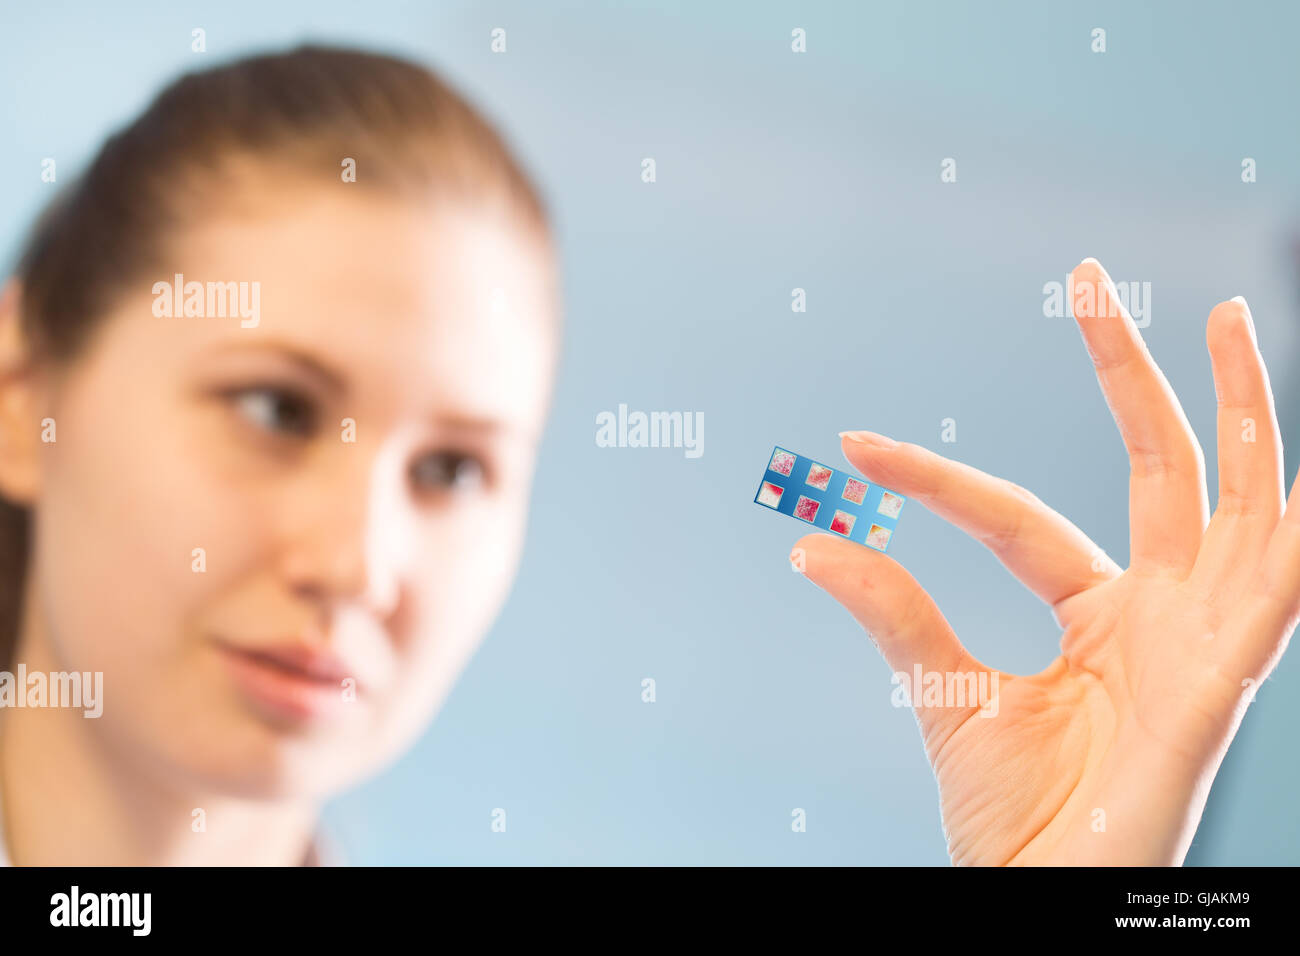 DNA microarray, DNA chip or biochip, array of nano DNA spots attached to a glass surface to measure levels of large numbers of g Stock Photo